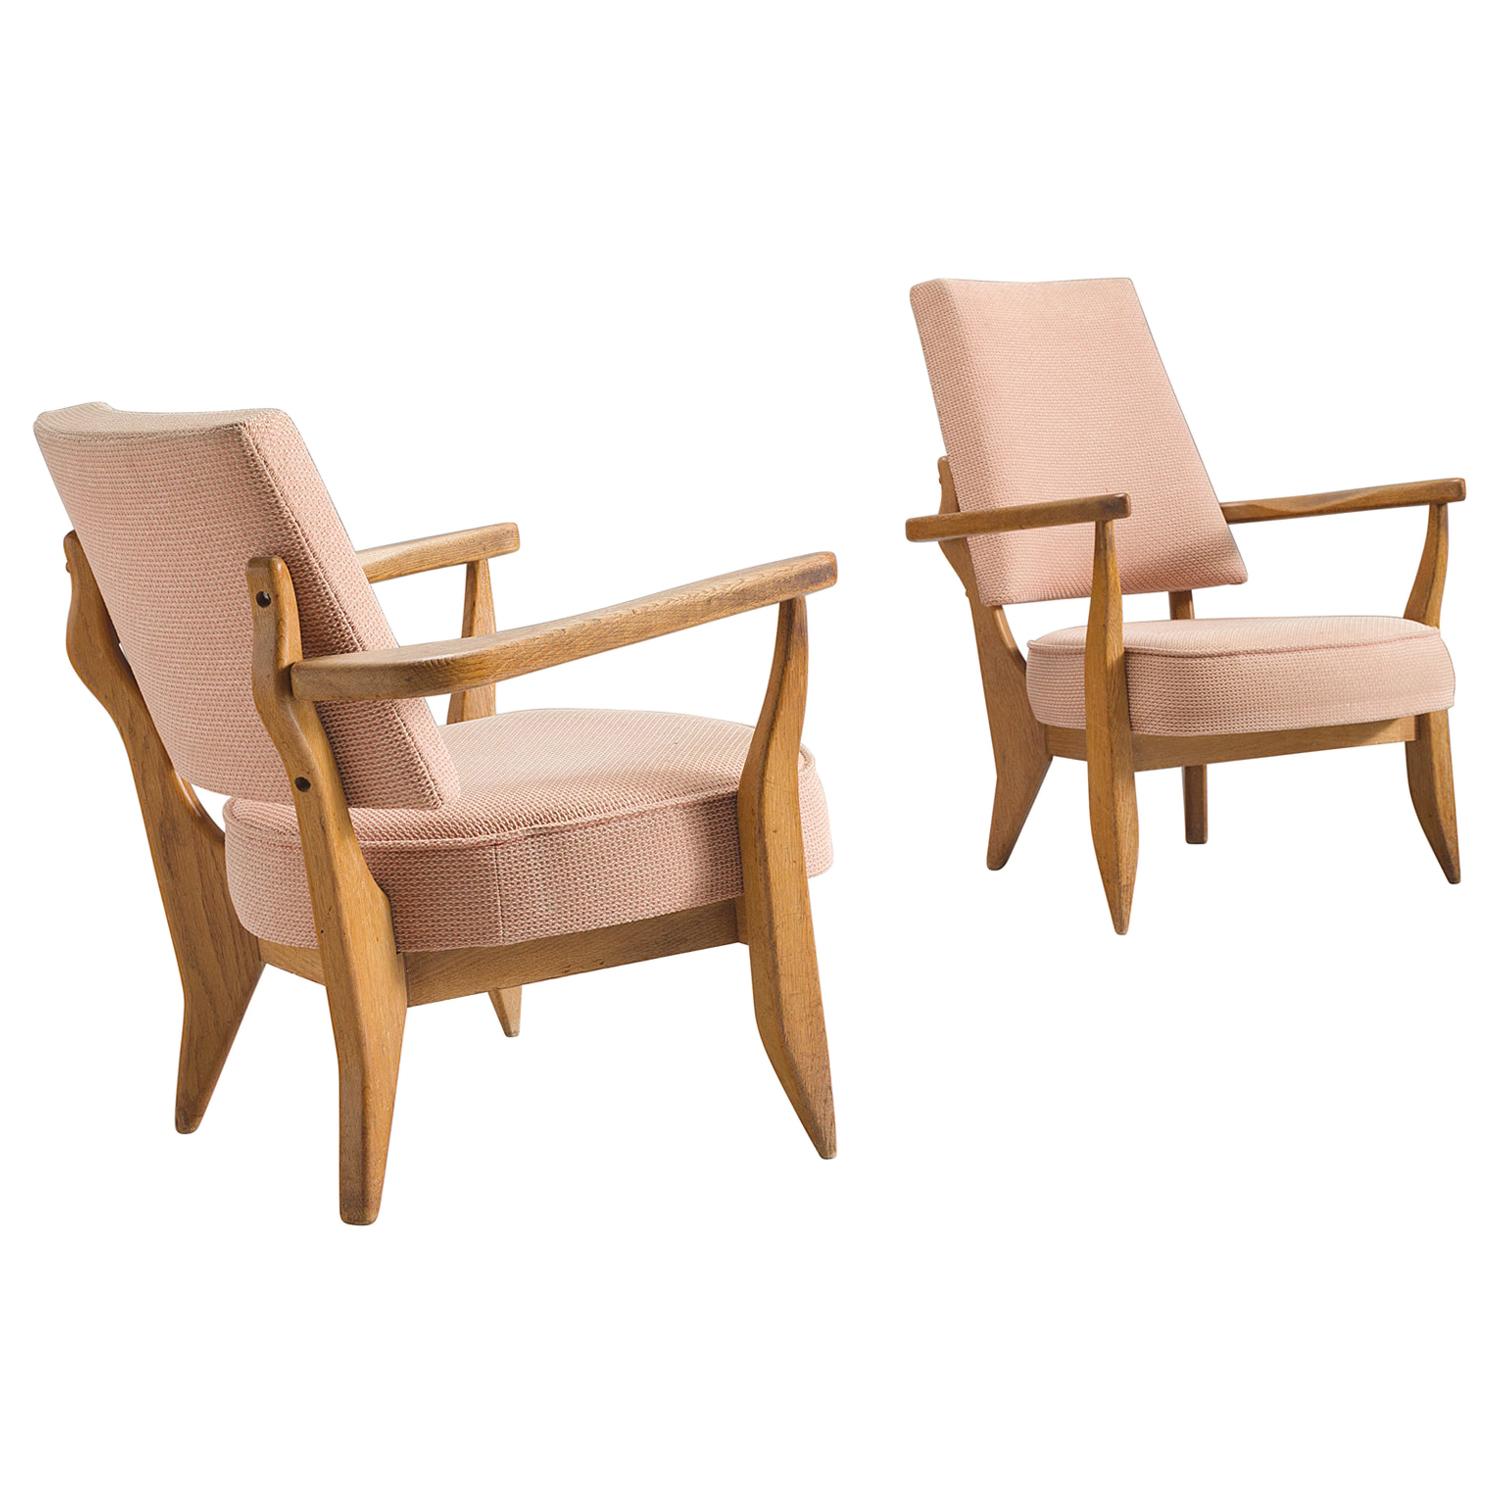 Guillerme & Chambron Pair of Lounge Chairs in Soft Pink Upholstery